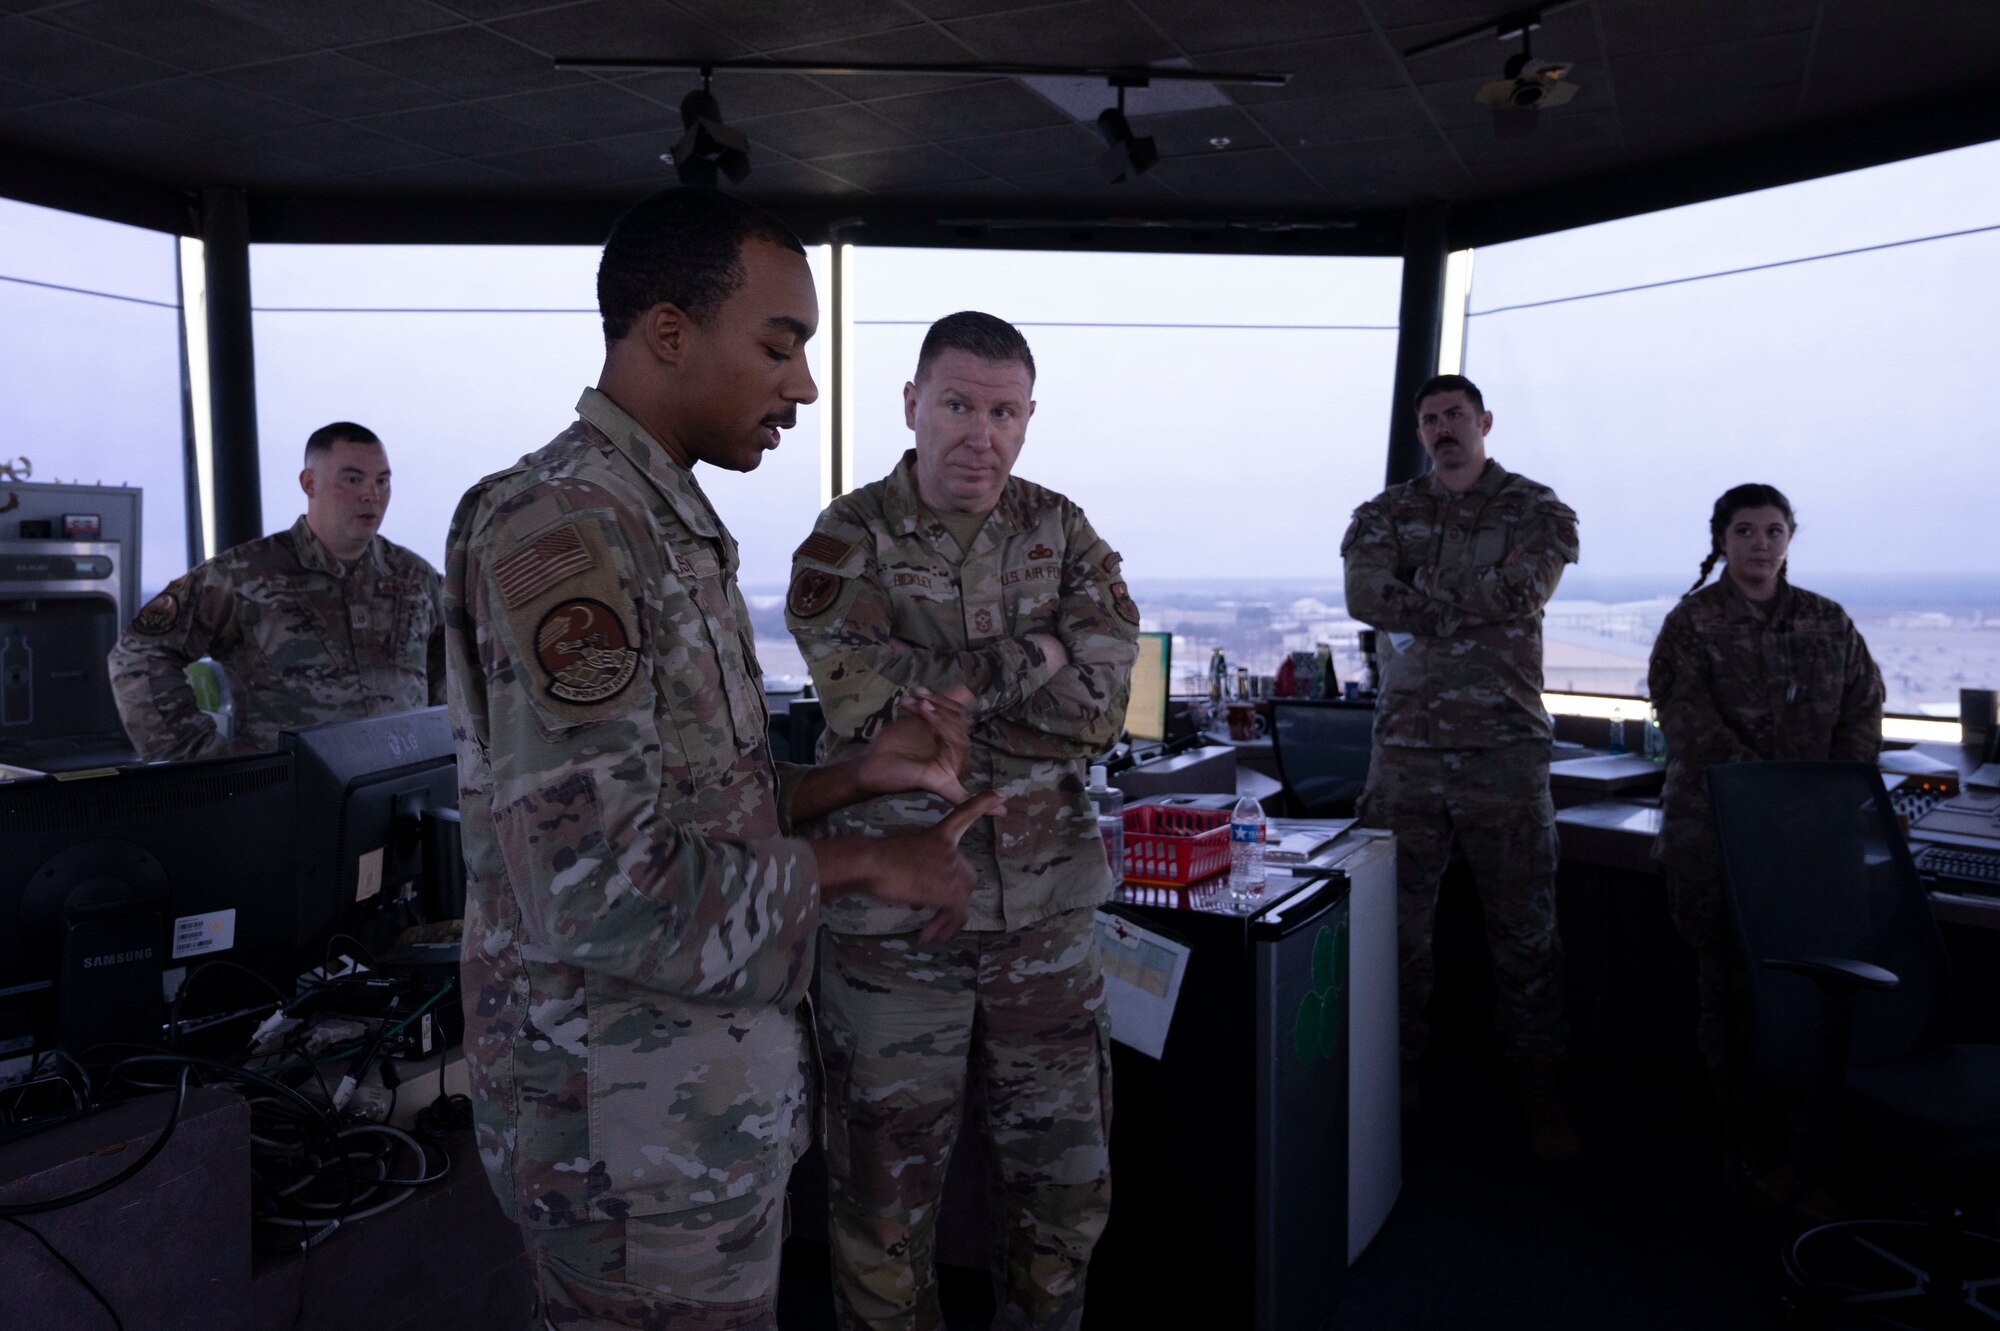 U.S. Air Force Chief Master Sgt. Chad Bickley (middle), command chief for Air Education and Training Command, speaks with Airman 1st Class Stephen Austin (left), 47th Operations Support Squadron air traffic controller, about the operations of the air traffic control tower at Laughlin Air Force Base, Texas, Jan. 22, 2024. Bickley visited Laughlin’s Airmen at the tower and learned more about daily operations and how they are supporting Laughlin’s mission of producing combat-ready Airmen, leaders and pilots. (U.S. Air Force photo by Senior Airman Kailee Reynolds)